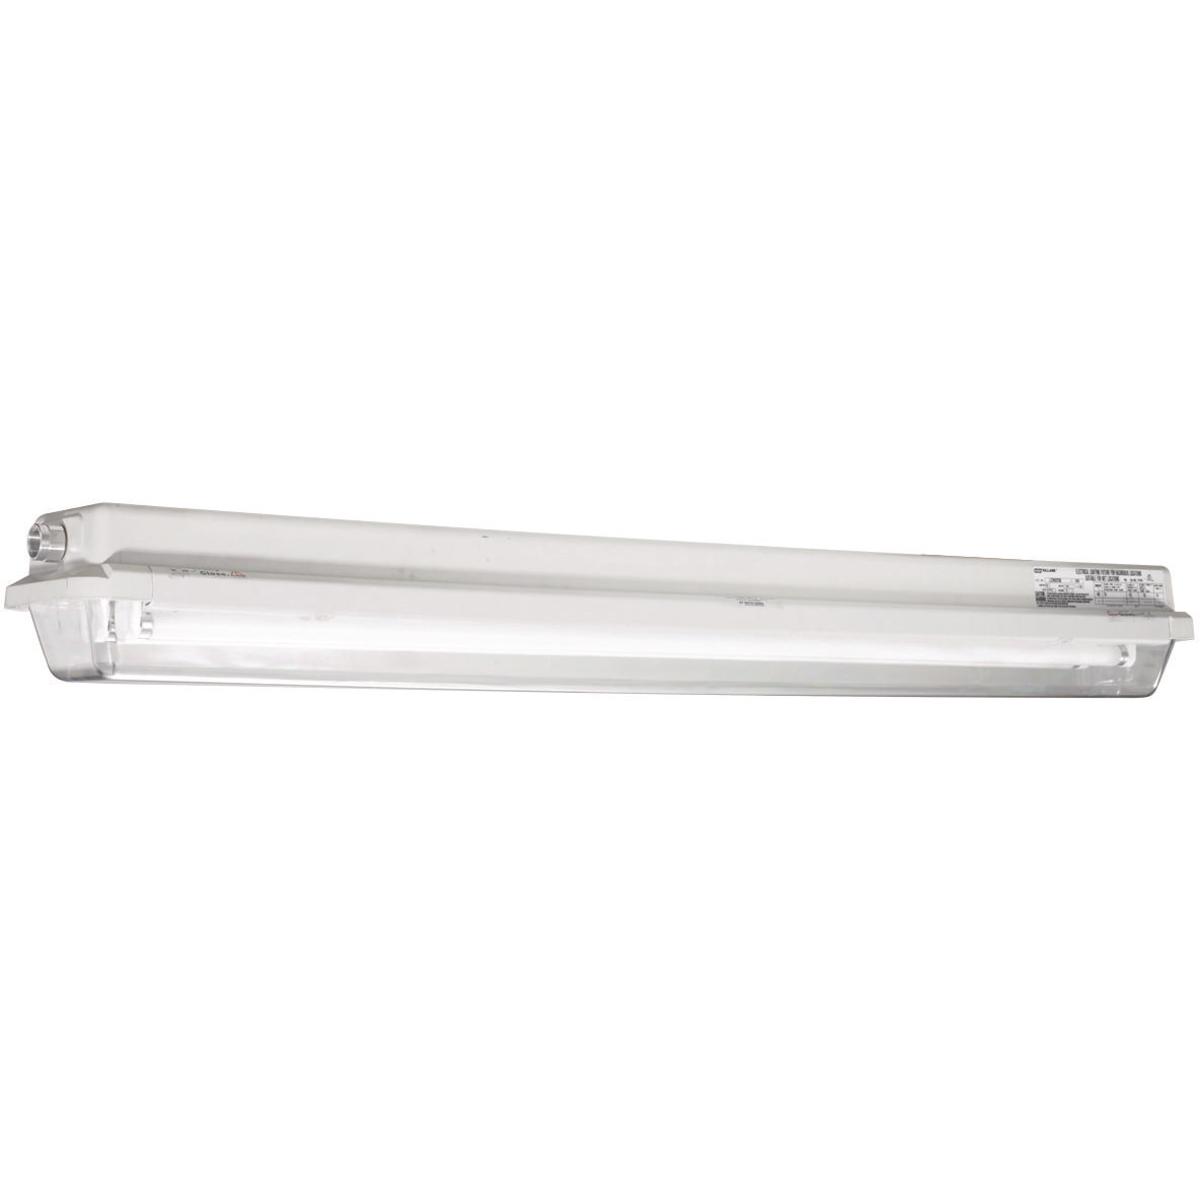 Hubbell LZ2N54230 LZ2S Series - Non-Metallic 54 Watt Fluorescent Light Fixture (Two 4-Foot Lamps Not Included) - Double-Ended Lamp Type - 120-277V At 50/60Hz- Hub Size 3/4 Inch NPT  ; Lexan® Clear Lens, impact resistant polycarbonate ; Housing-one piece fiberglass reinforc